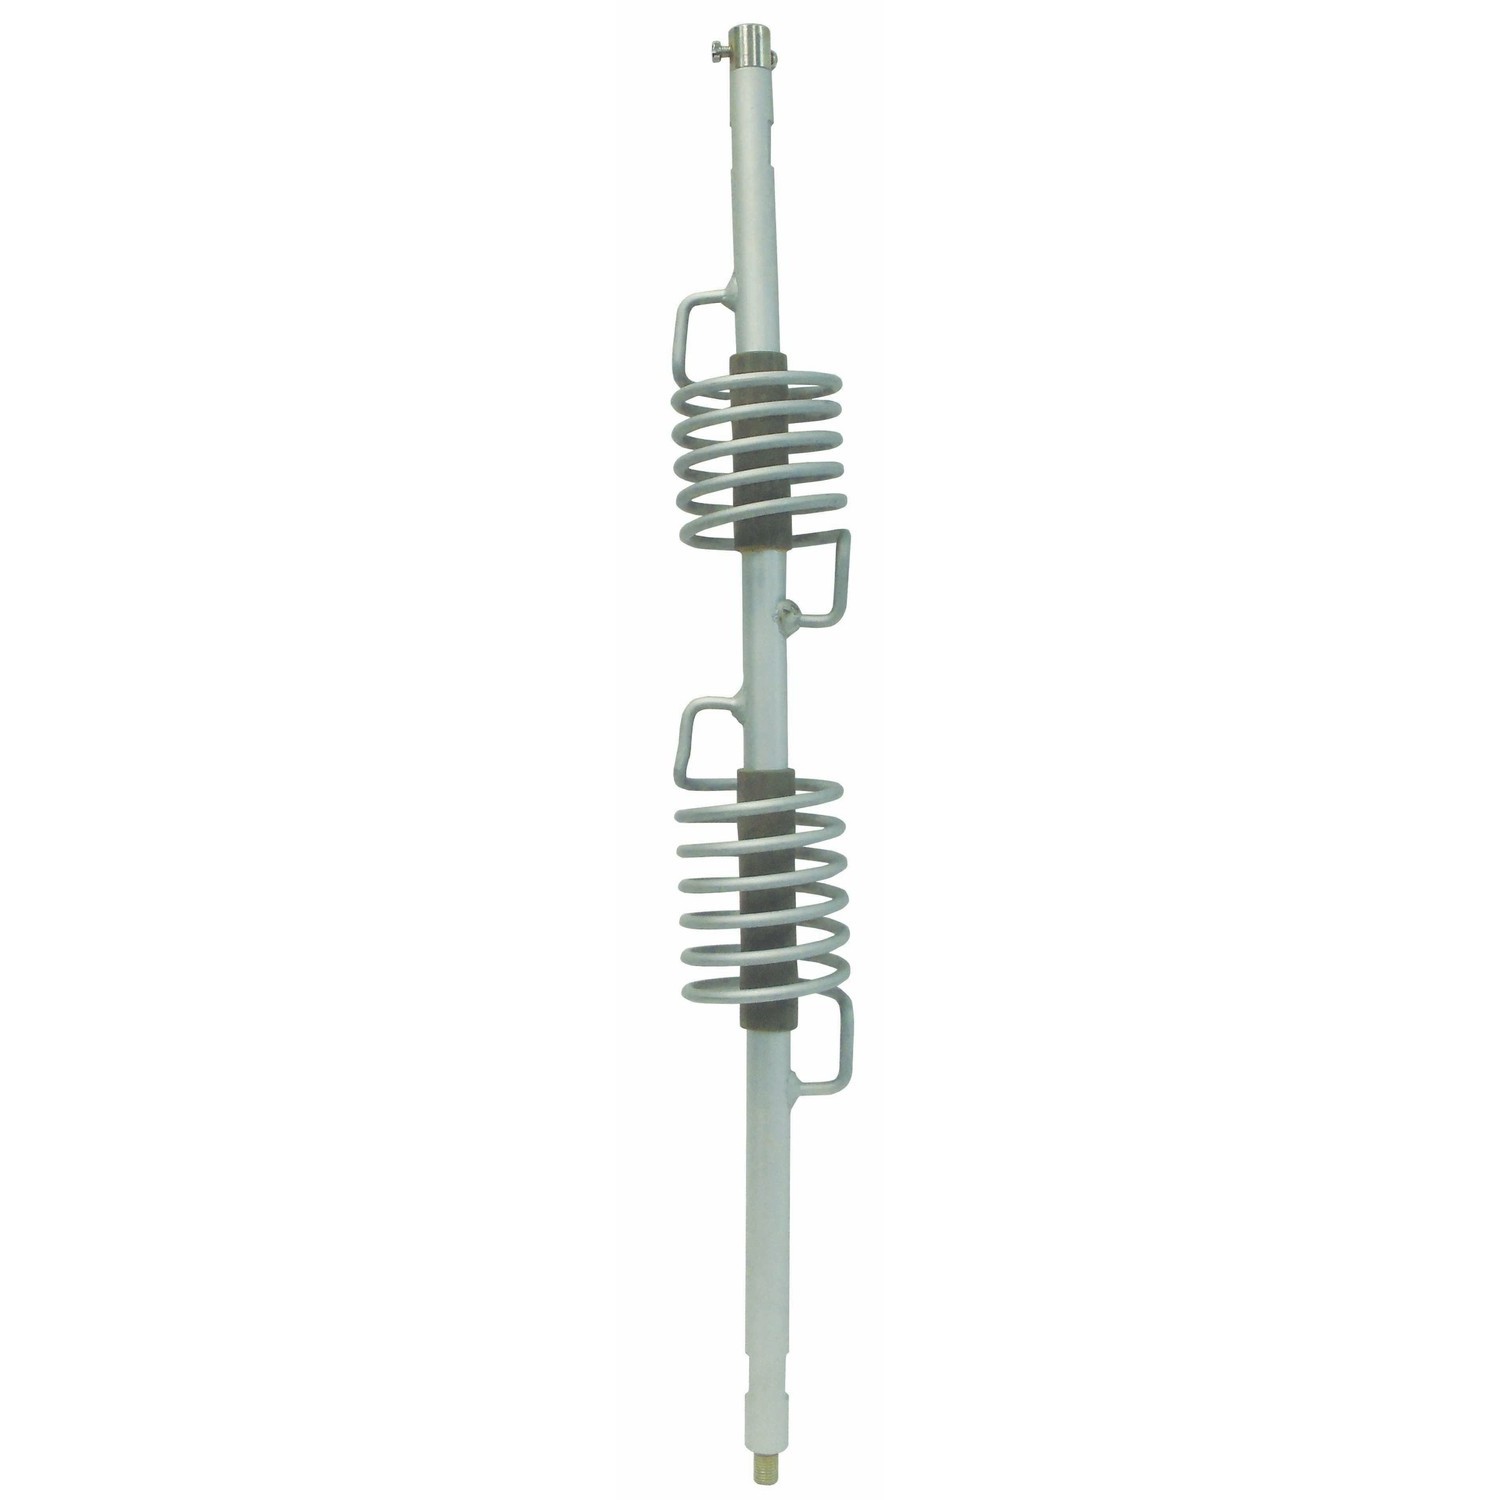 Double Coil Aluminum Antenna W/ 36" Stainless Whip